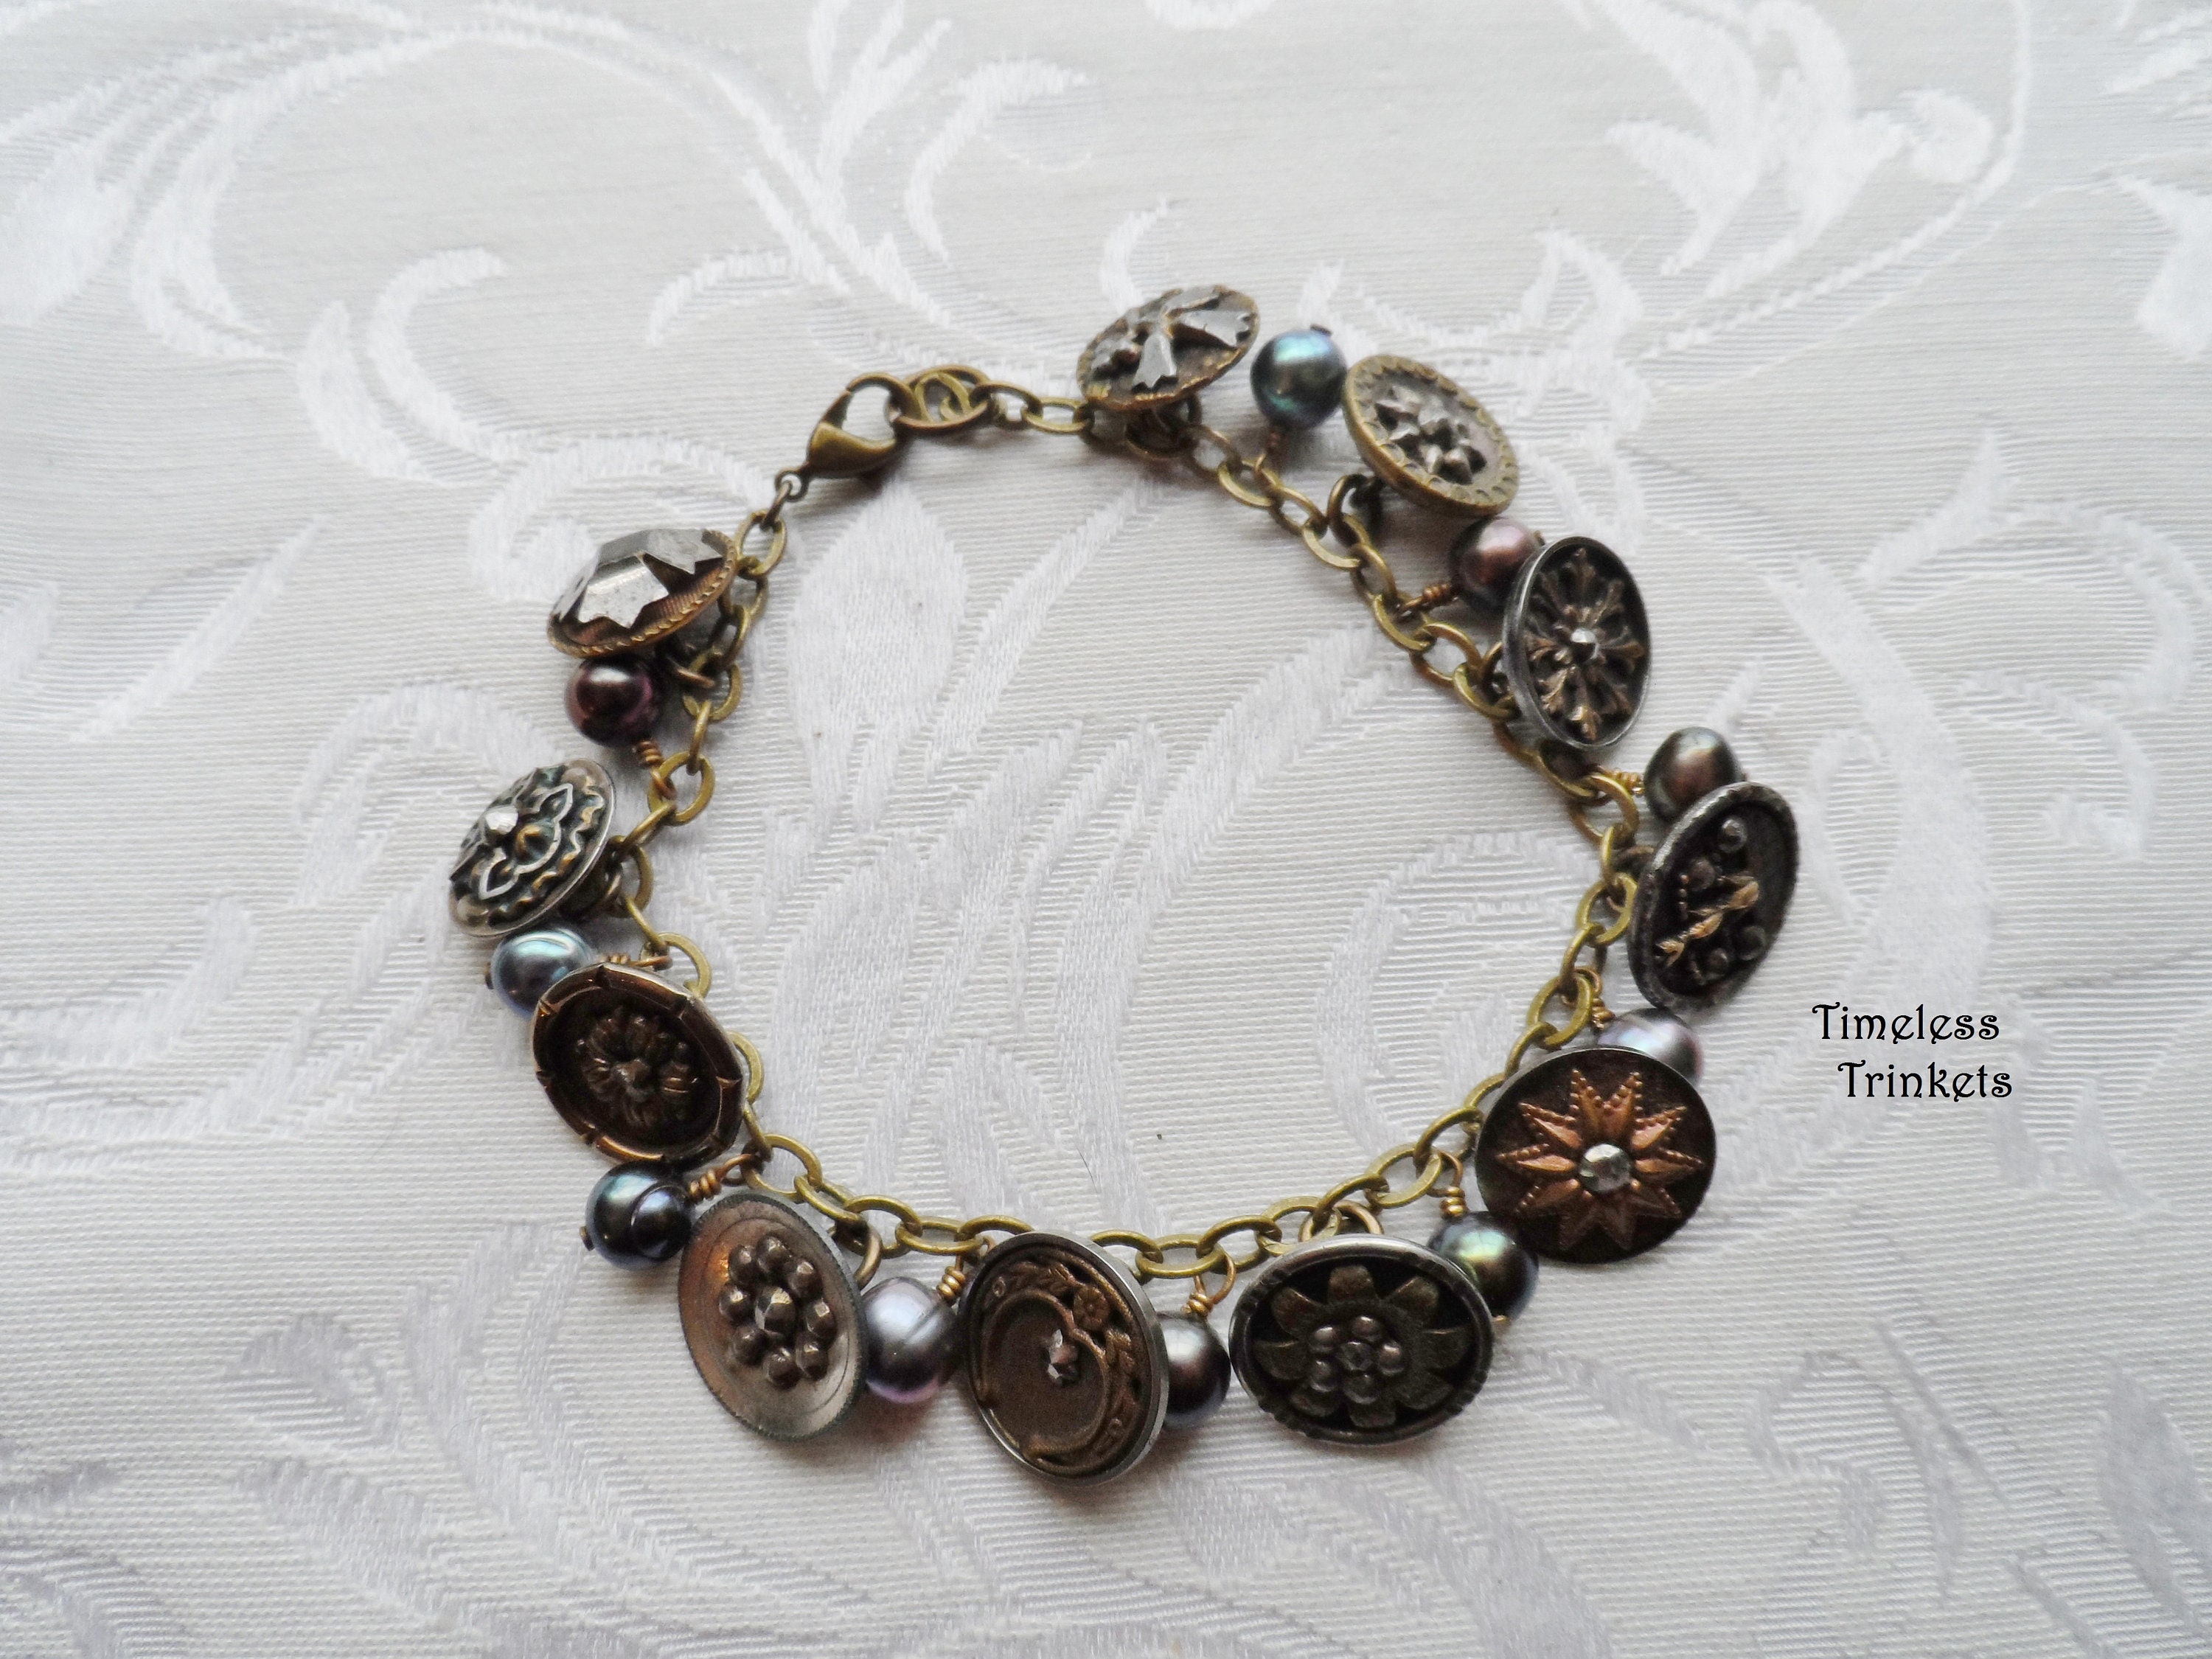 Antique Button Bracelet Iridescent Freshwater Pearls Gray 